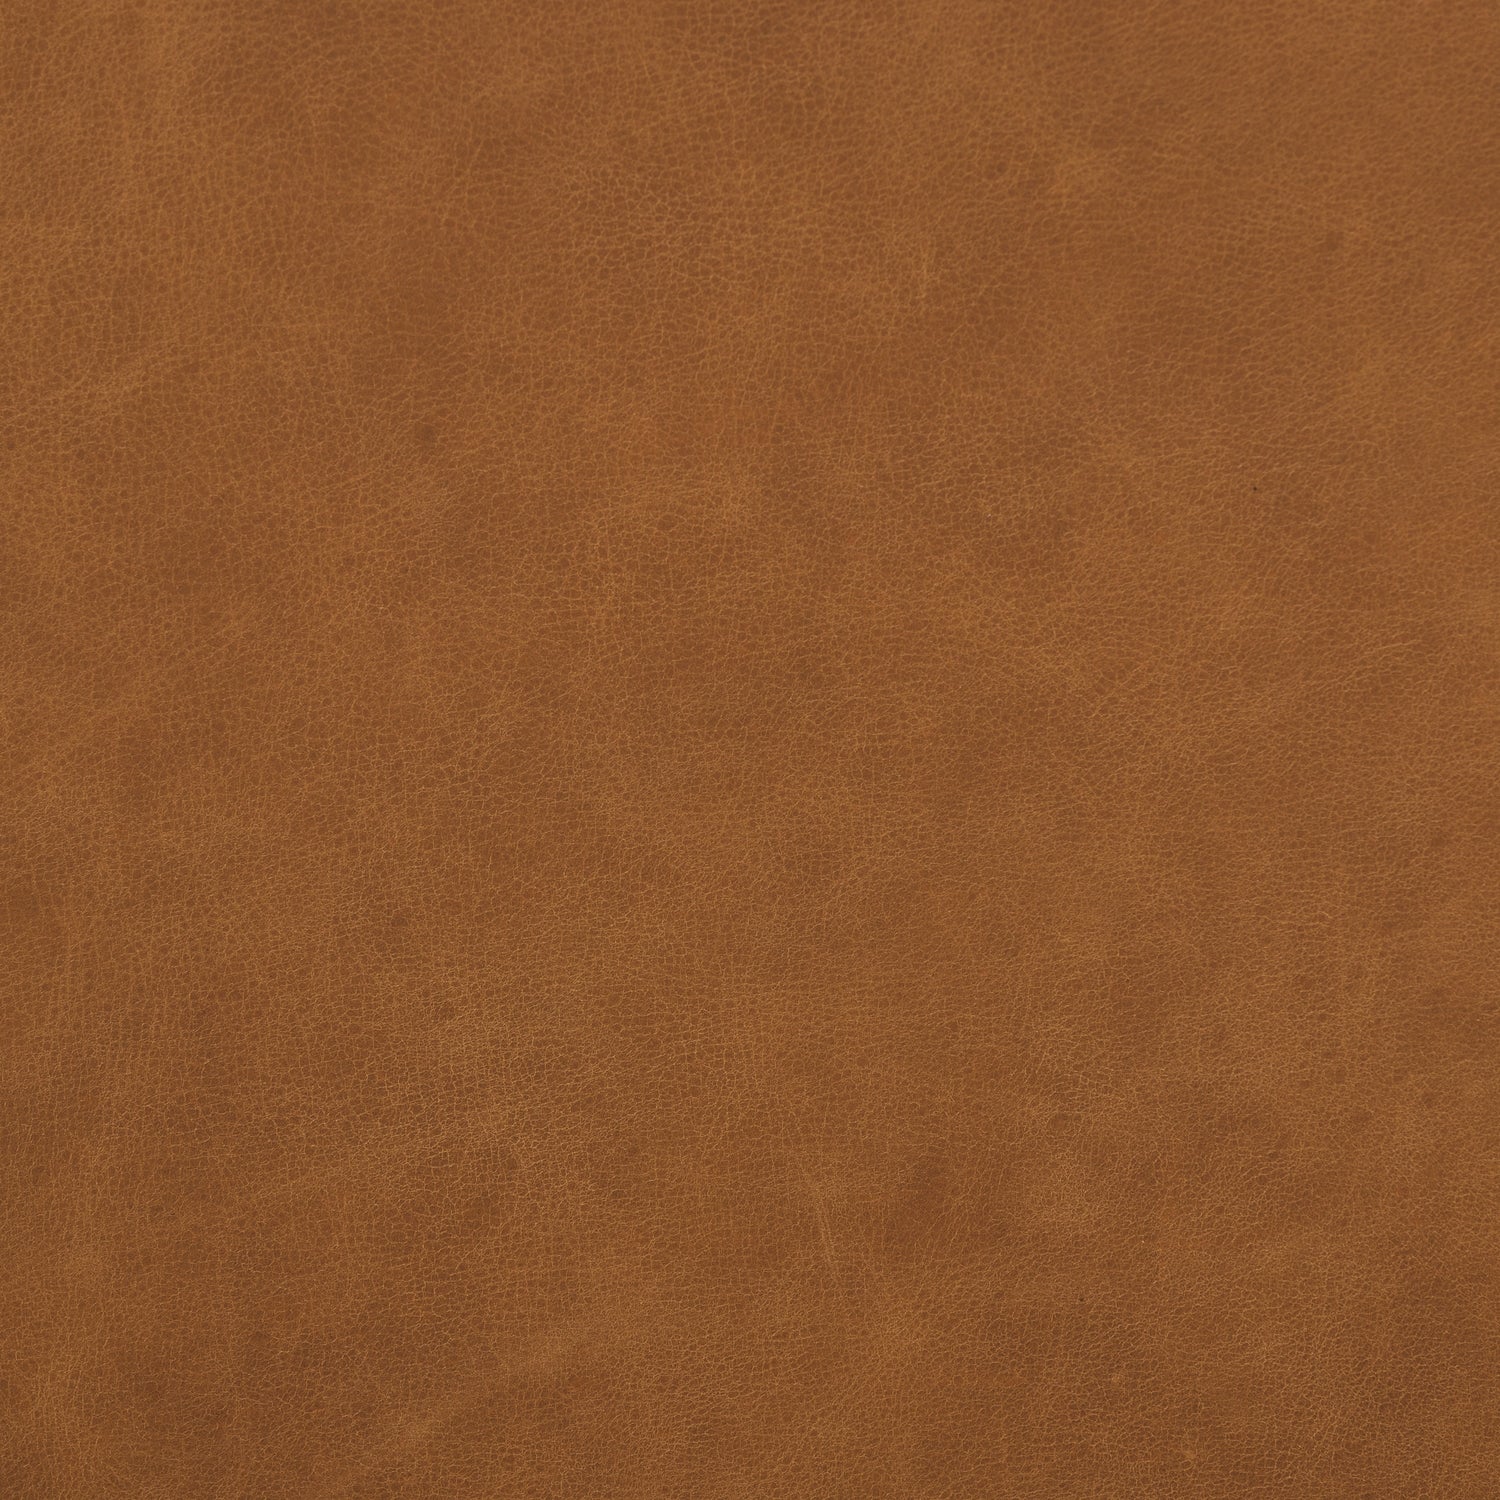 Italian Tanned Leather Swatches Saddle Tan